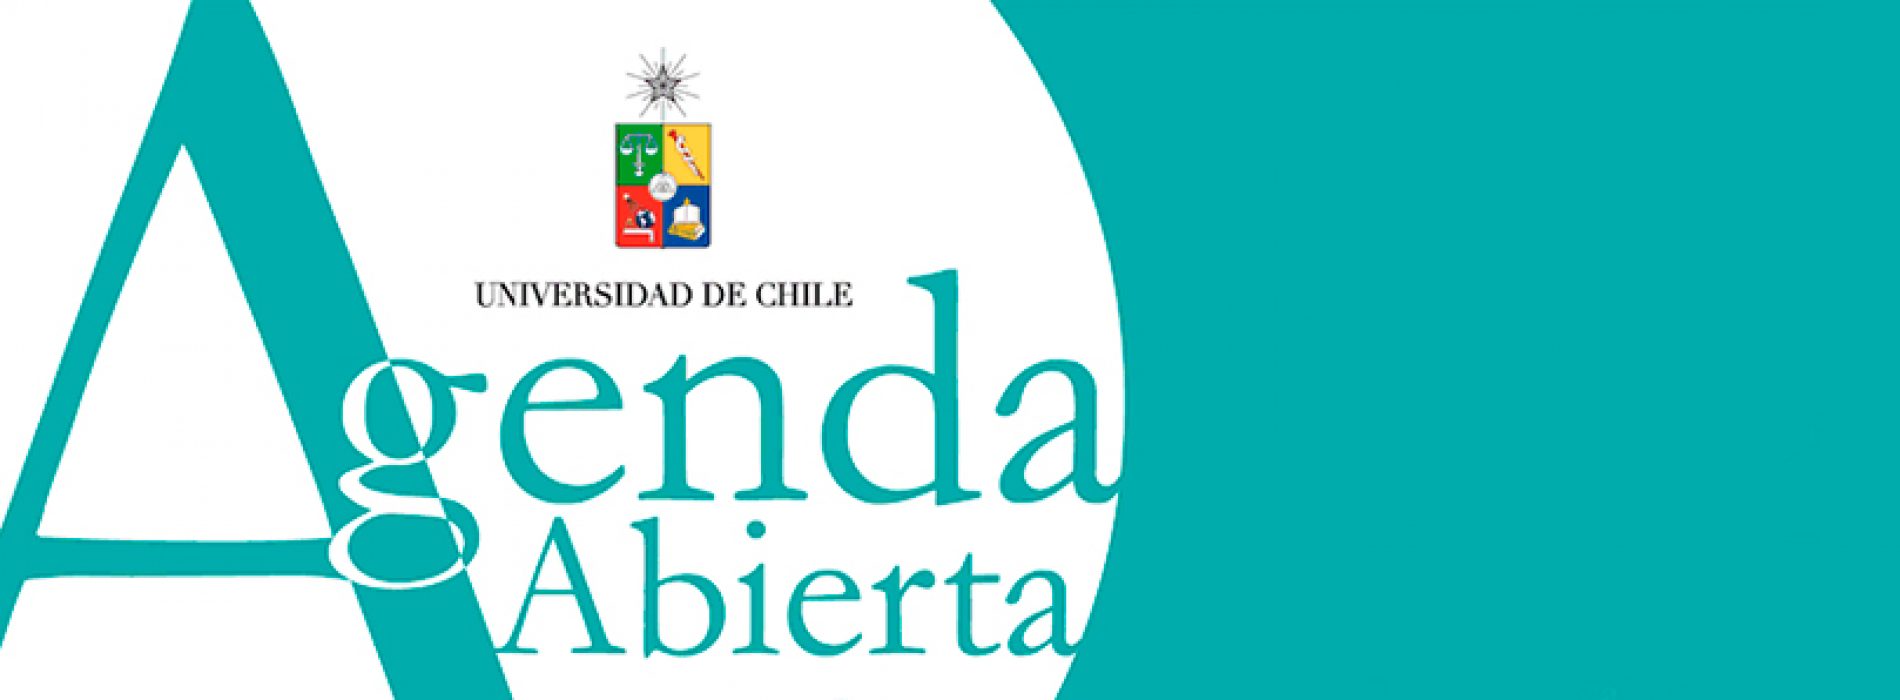 "The Chile invites". Check out its activities in April